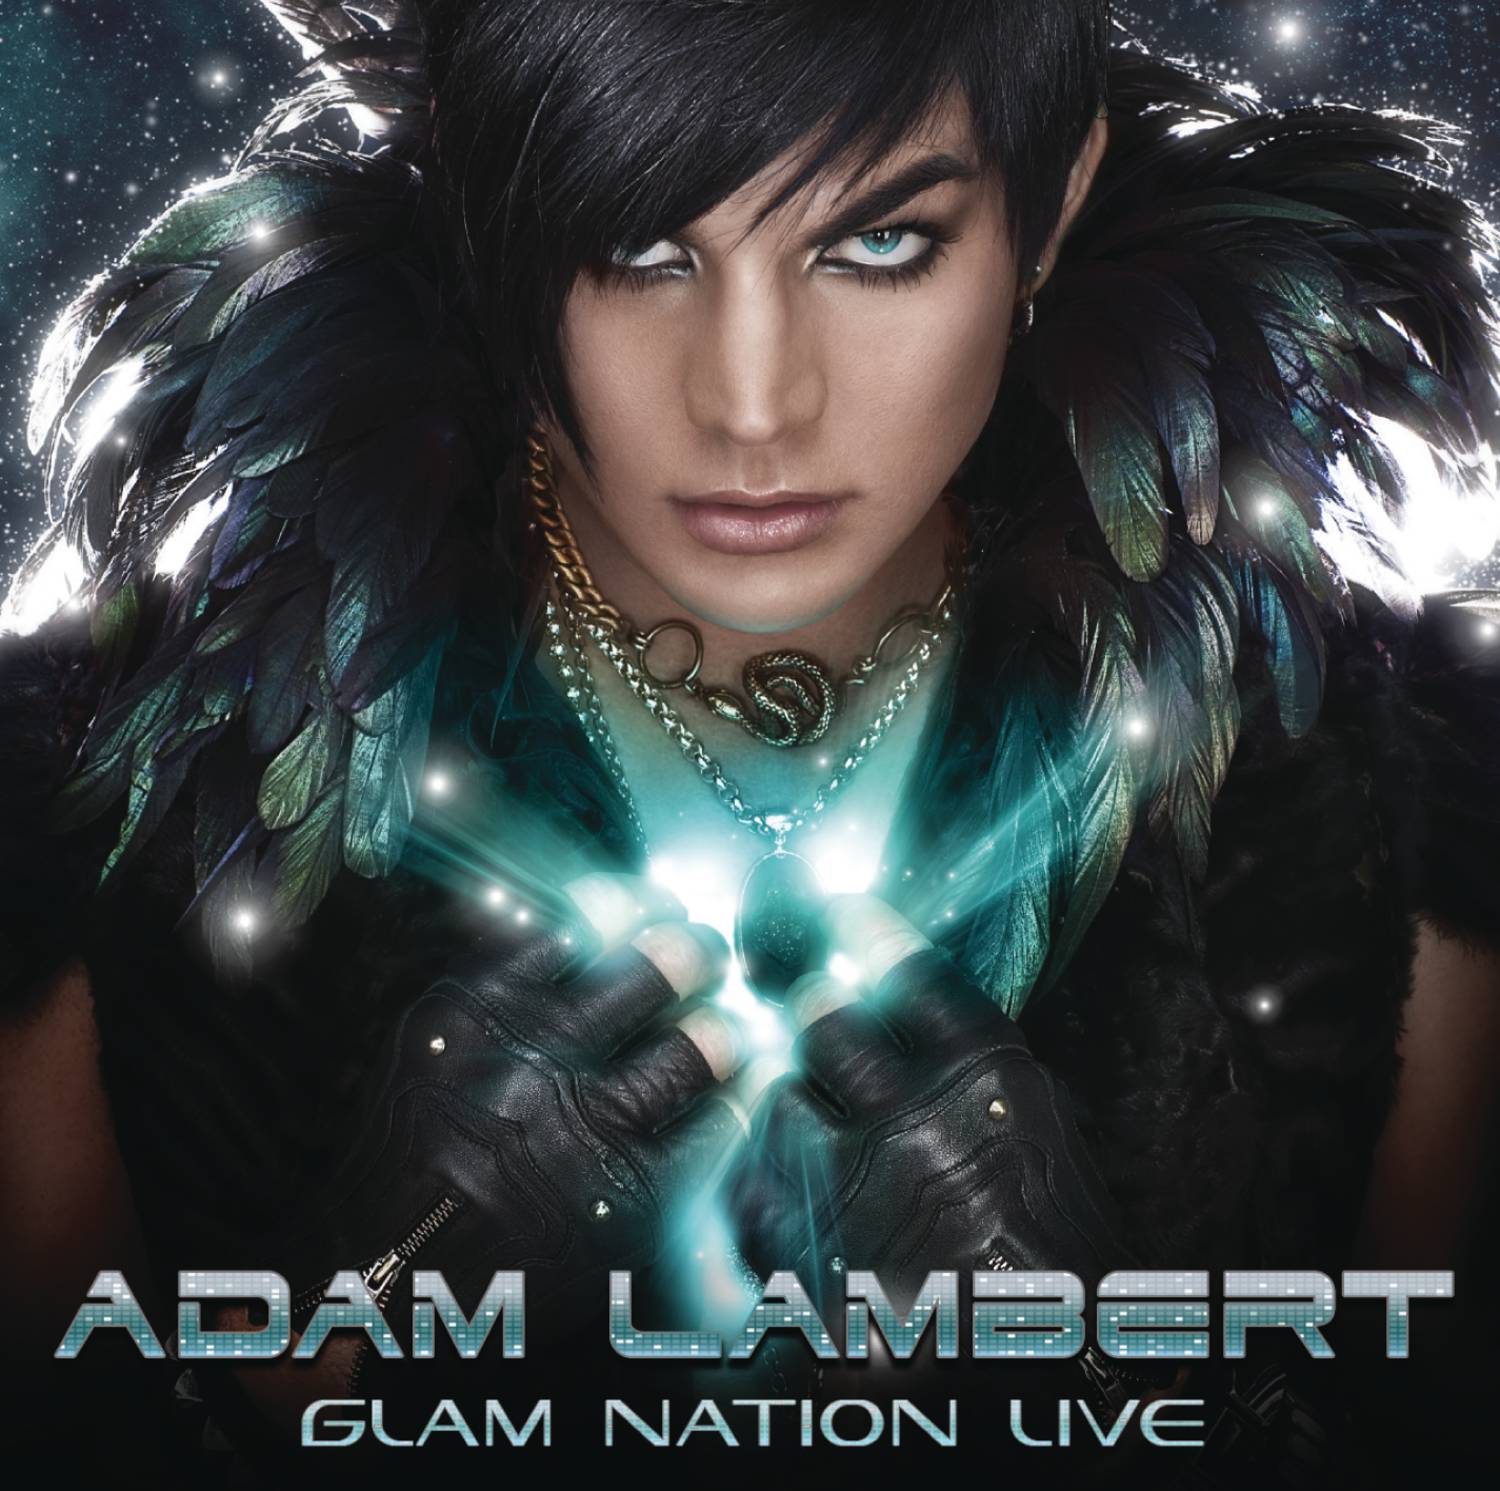 Jamming With Lazers (Glam Nation Live)